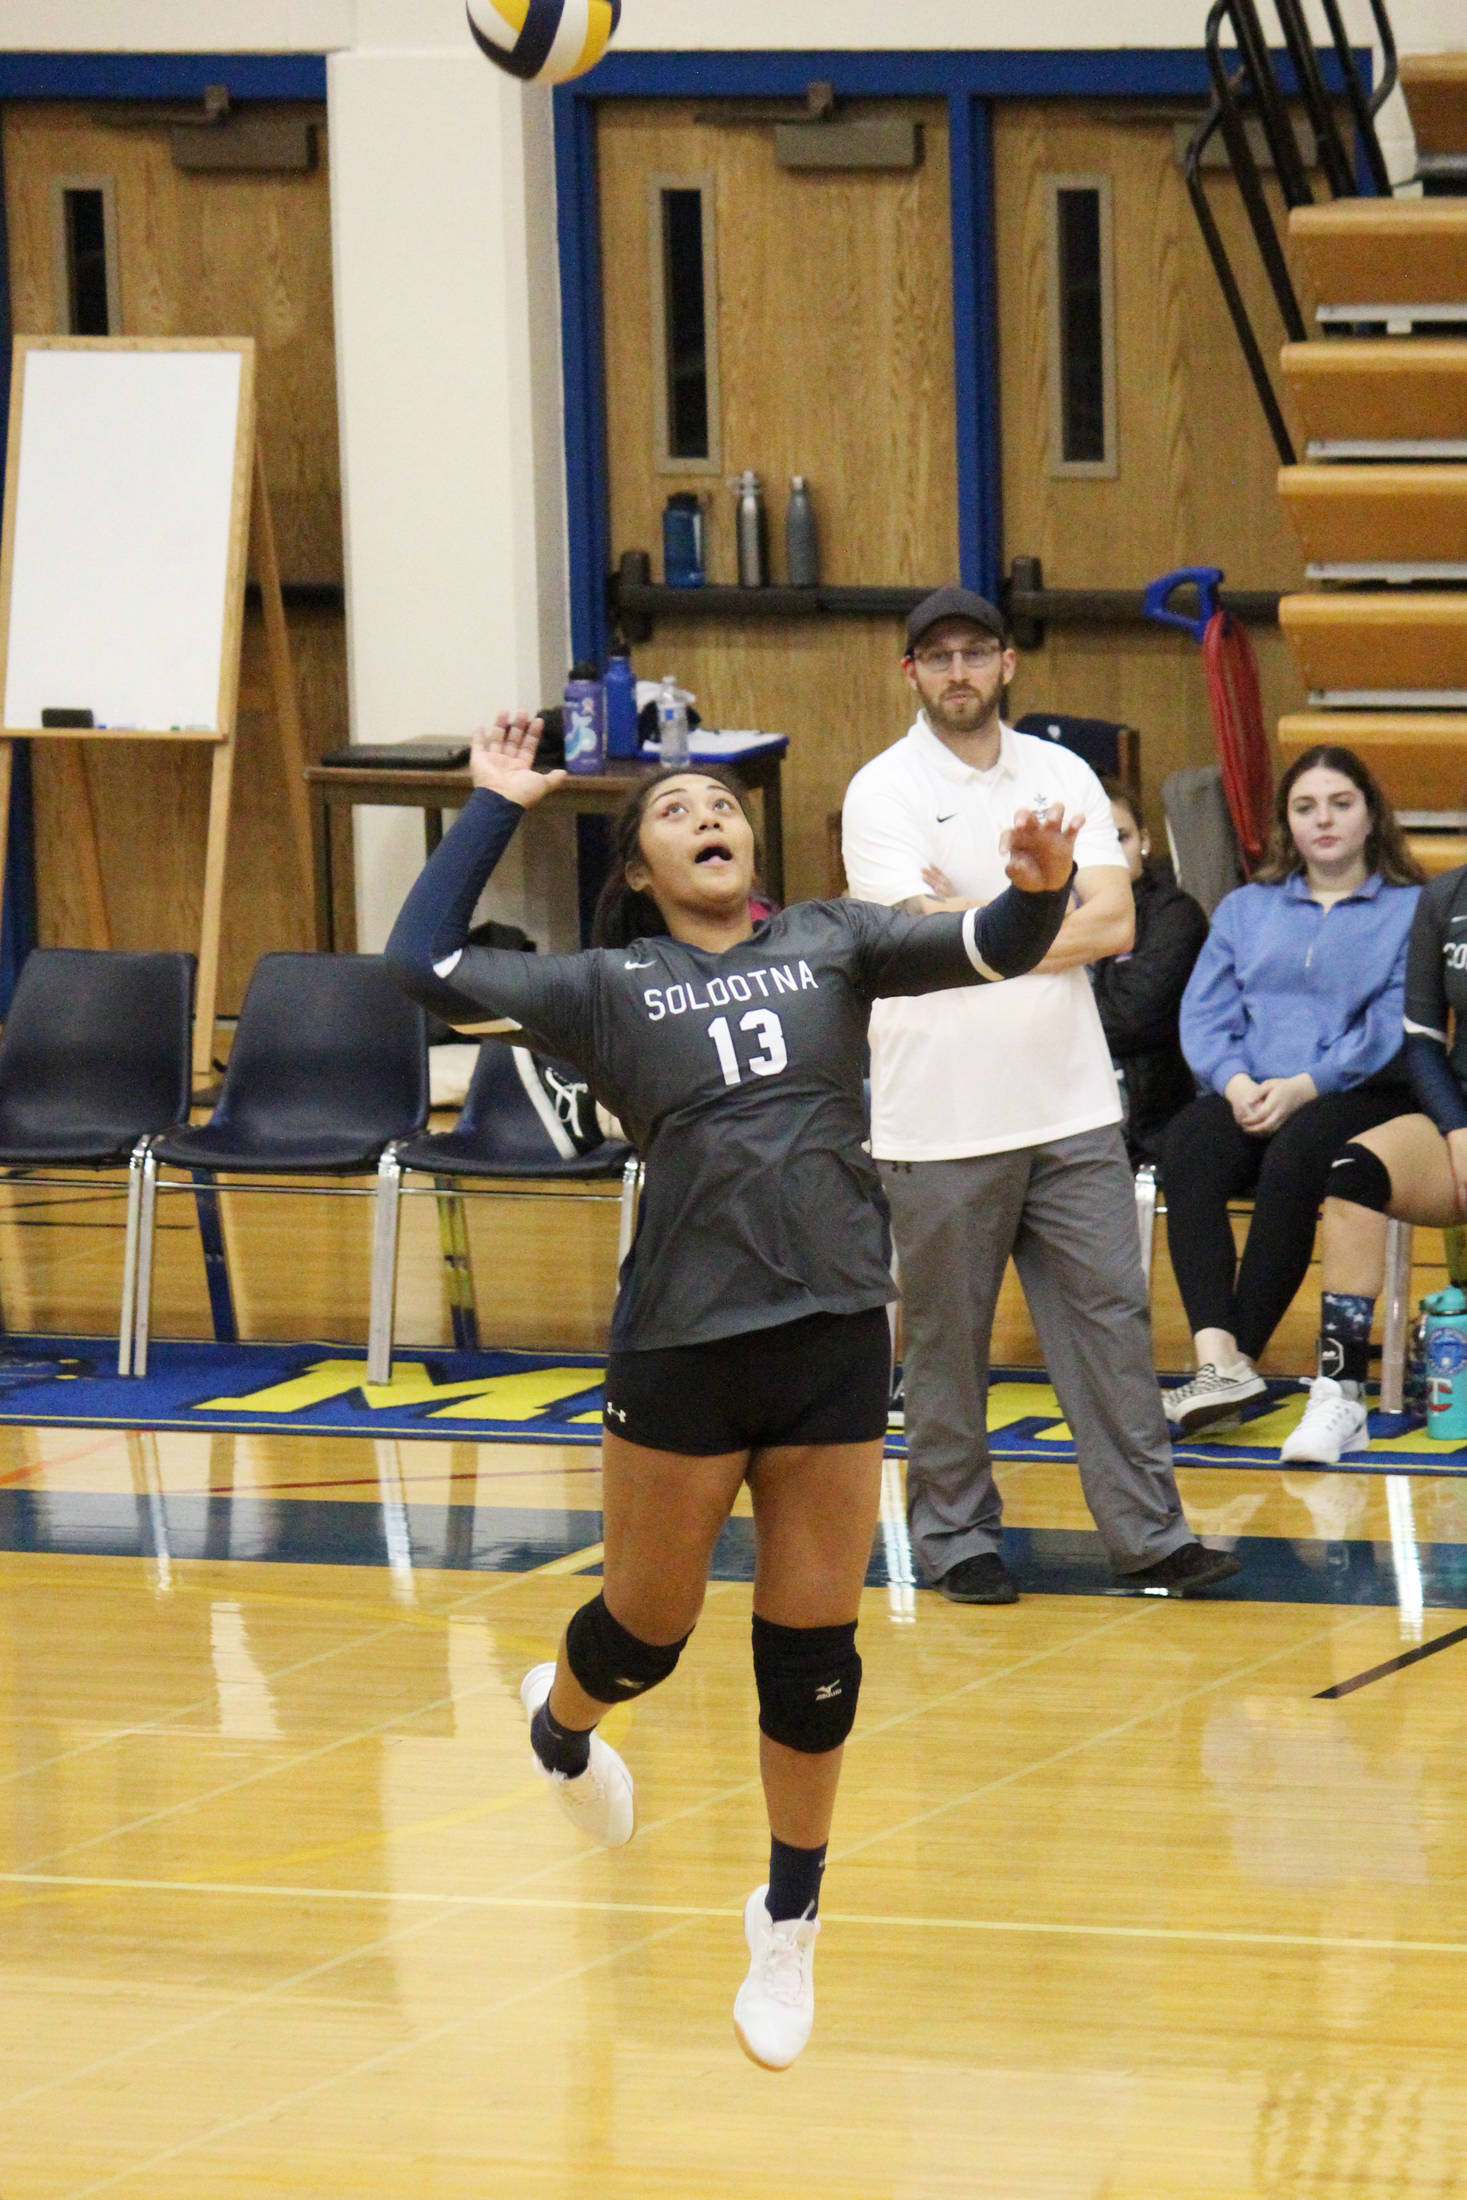 Soldotna’s Ituau Tuisaula jumps to hit the ball during a Tuesday, Oct. 8, 2019 volleyball game at Homer High School in Homer, Alaska. (Photo by Megan Pacer/Homer News)